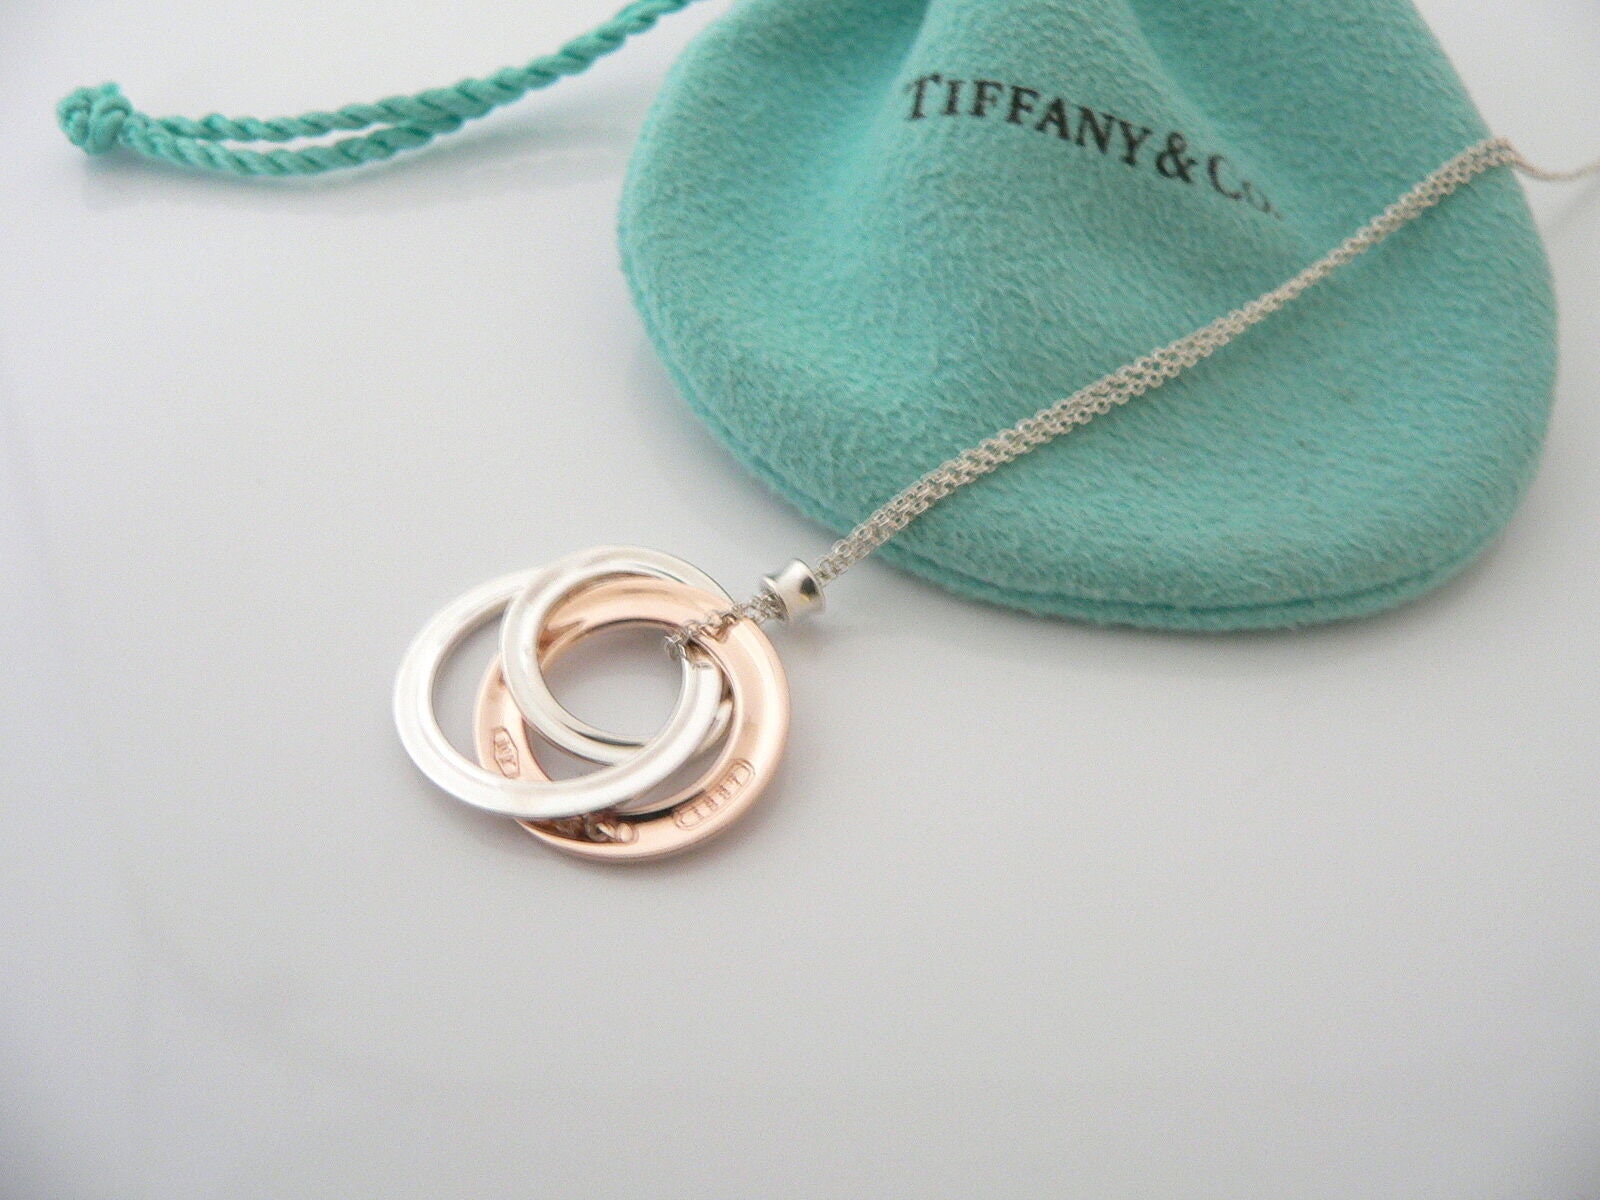 Tiffany And Co Interlocking Circles Necklace Pendant 17 OR 18 Inch Silver  Rubedo Metal Gift Pouch Love Birthday Anniversary